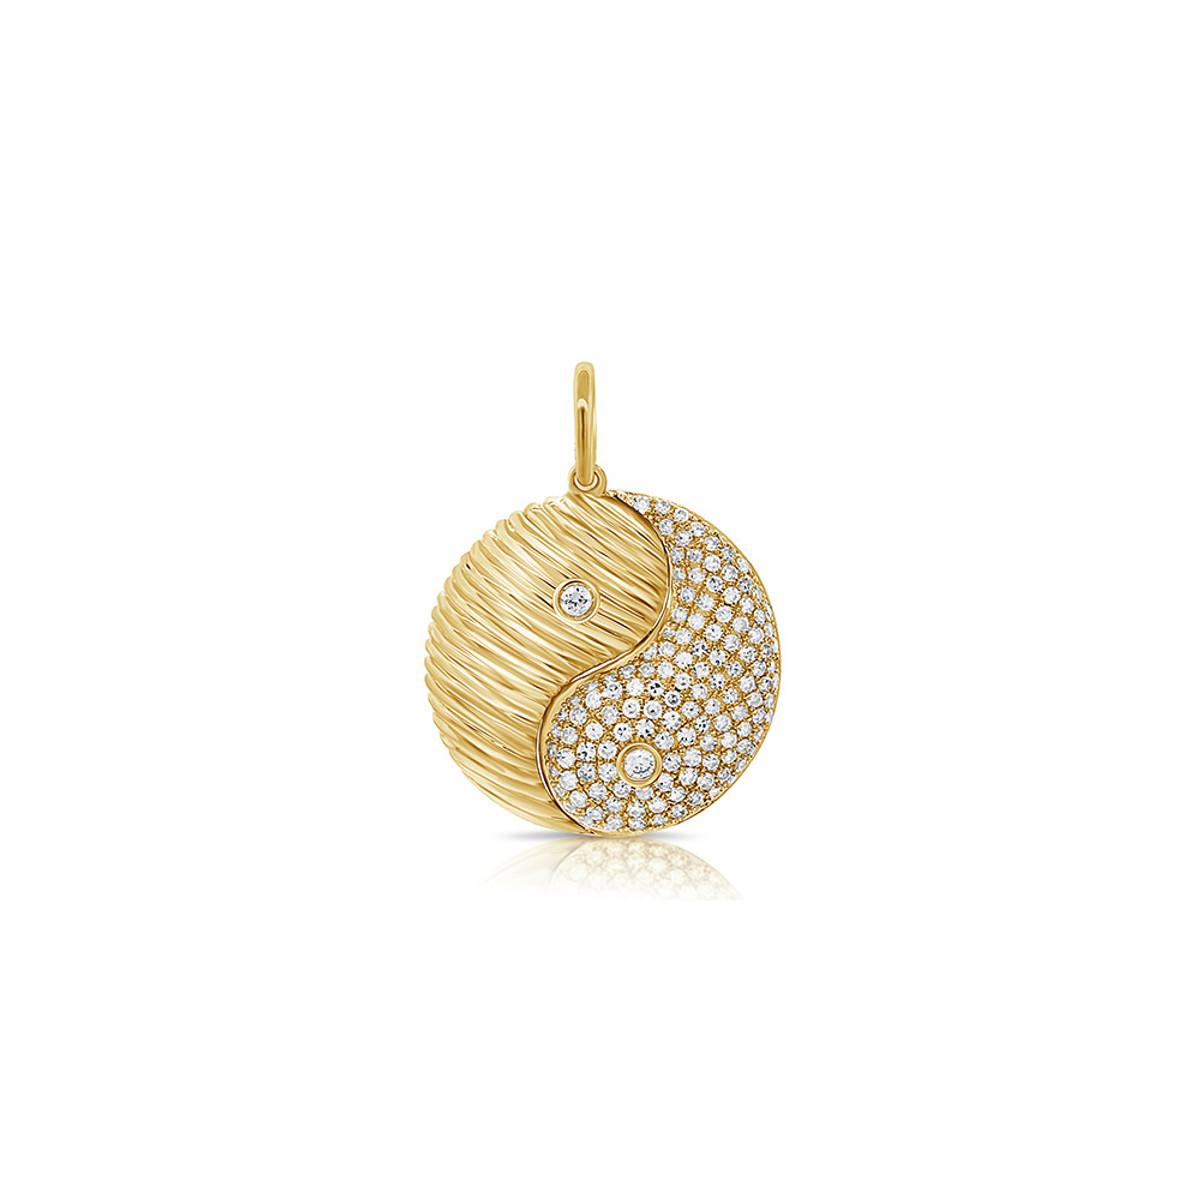 Hyde Park Collection 14K Yellow Gold Yin & Yang Diamond Charm-44533 Product Image